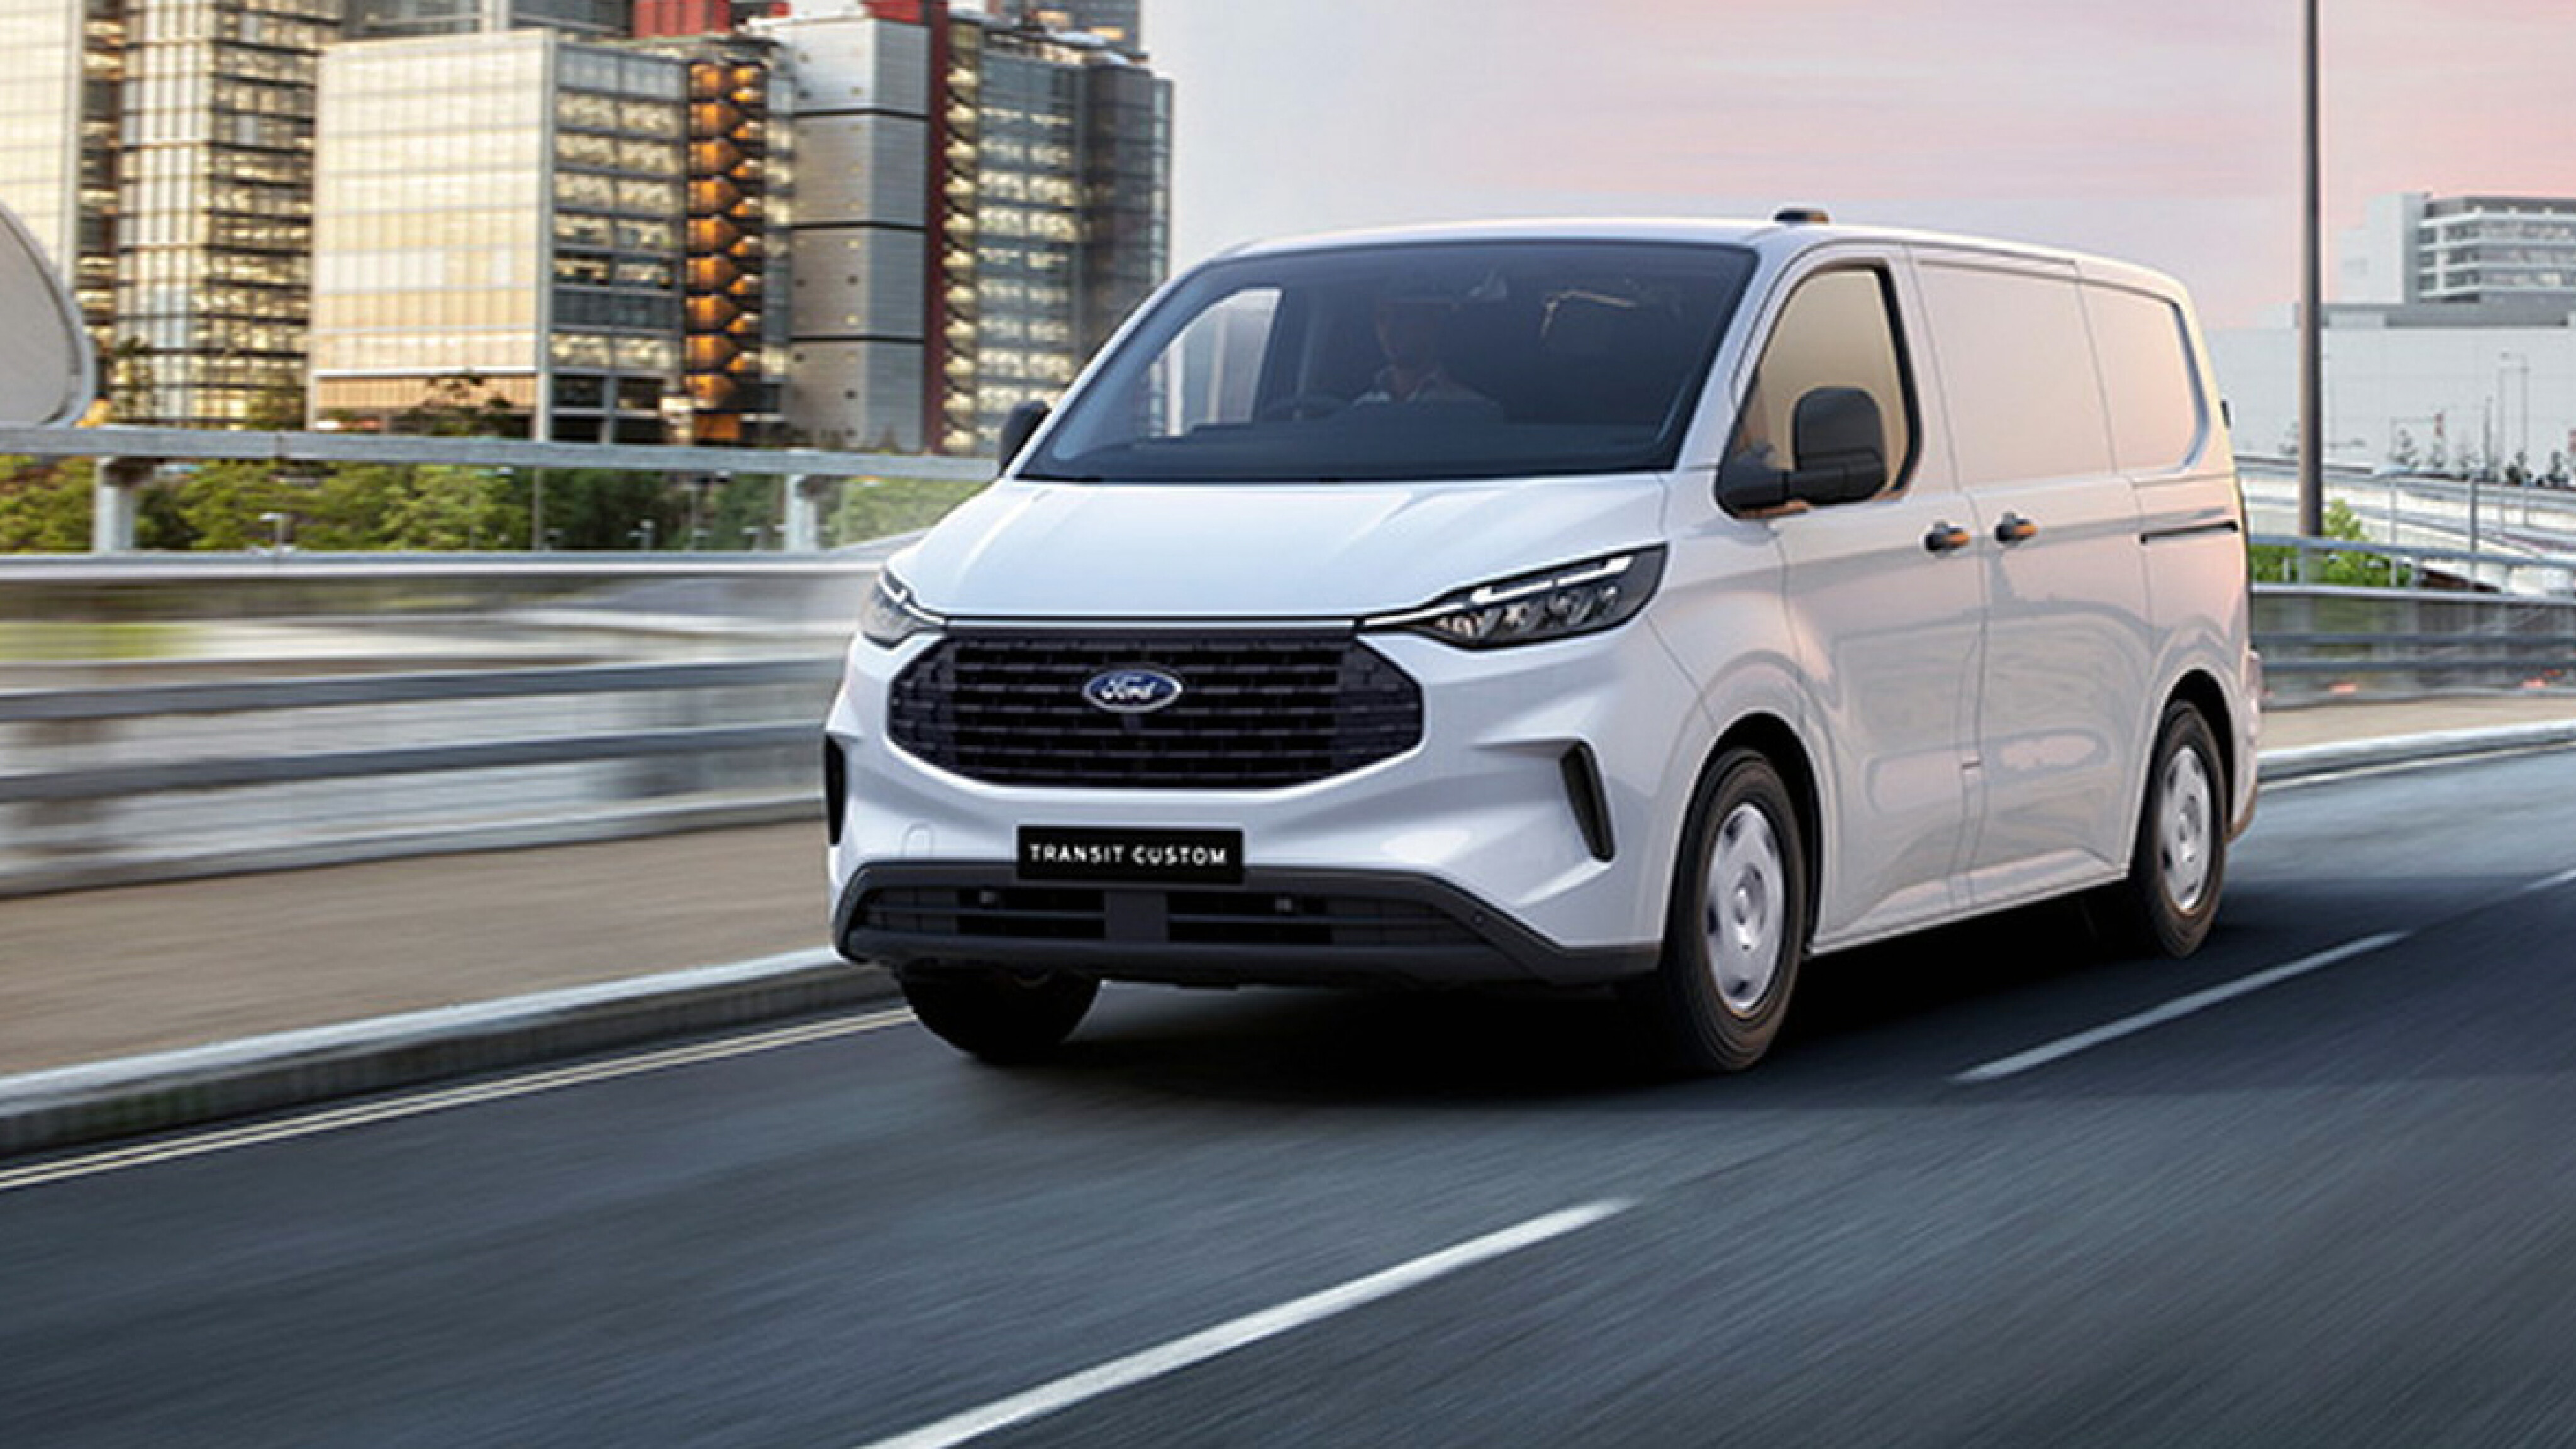 The E-Transit Custom is Ford's next electric van